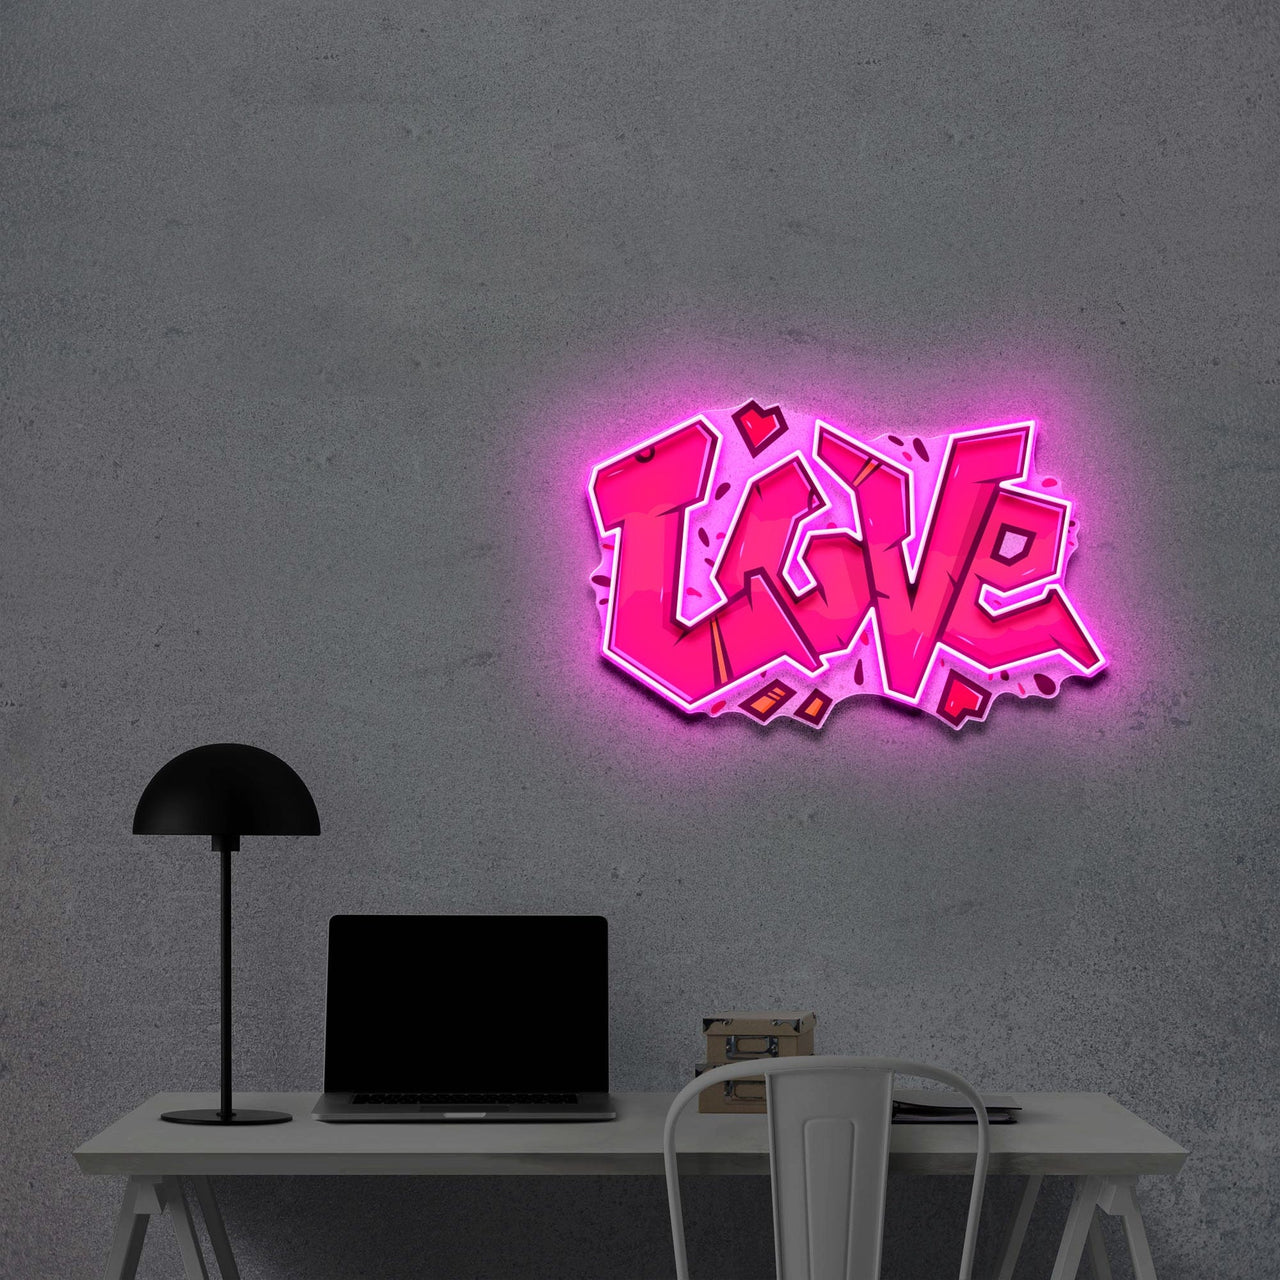 "Love" Neon x Acrylic Artwork by Neon Icons